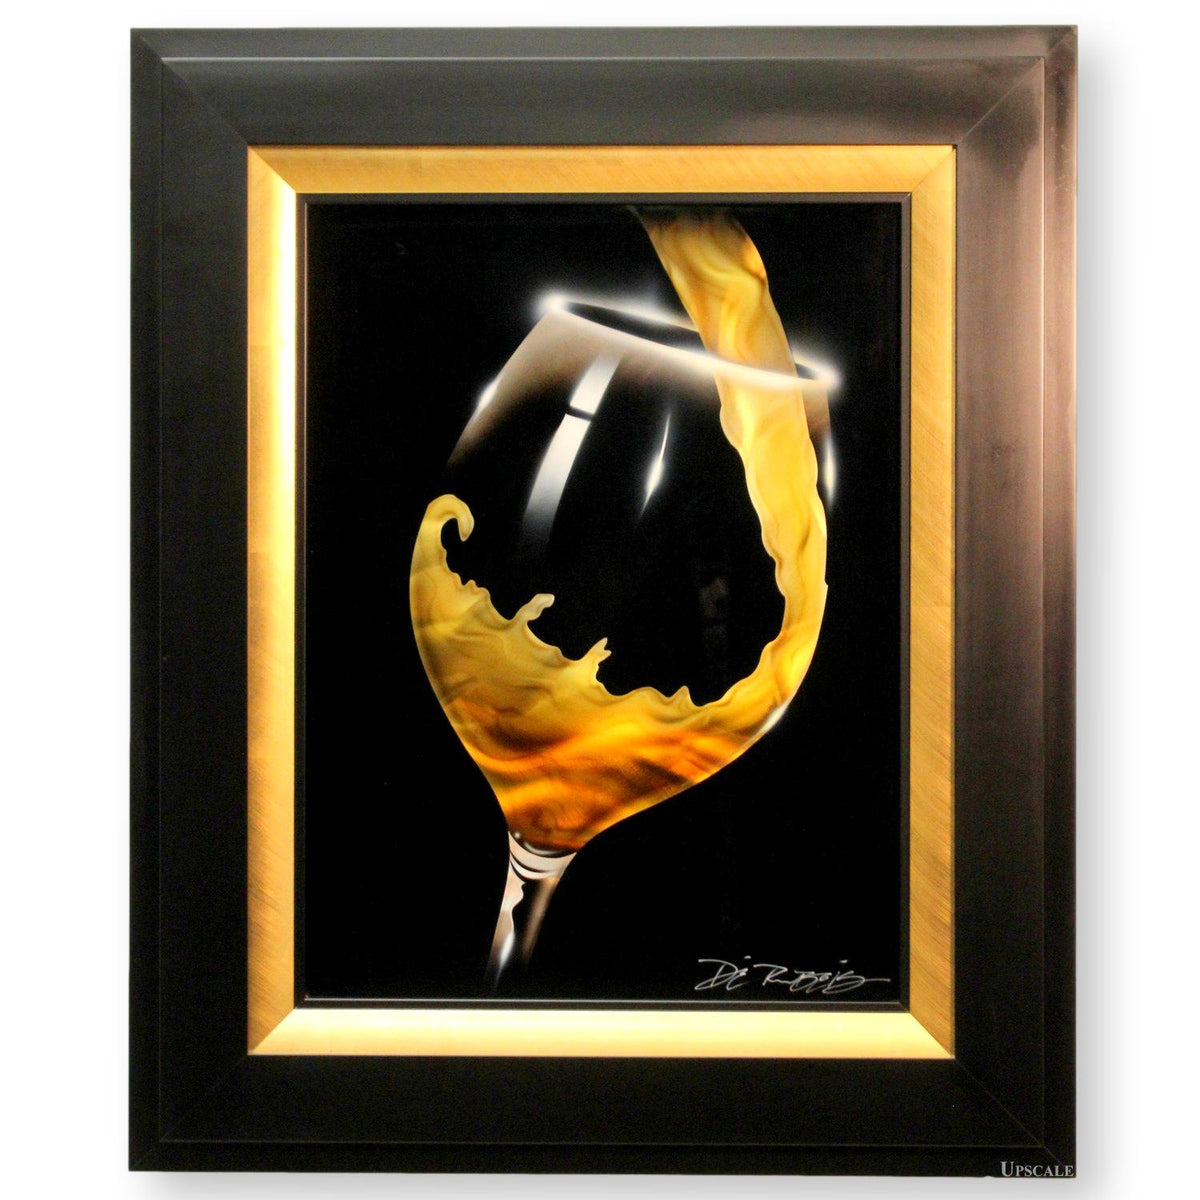 Framed 'White Pour' By Chris DeRubeis